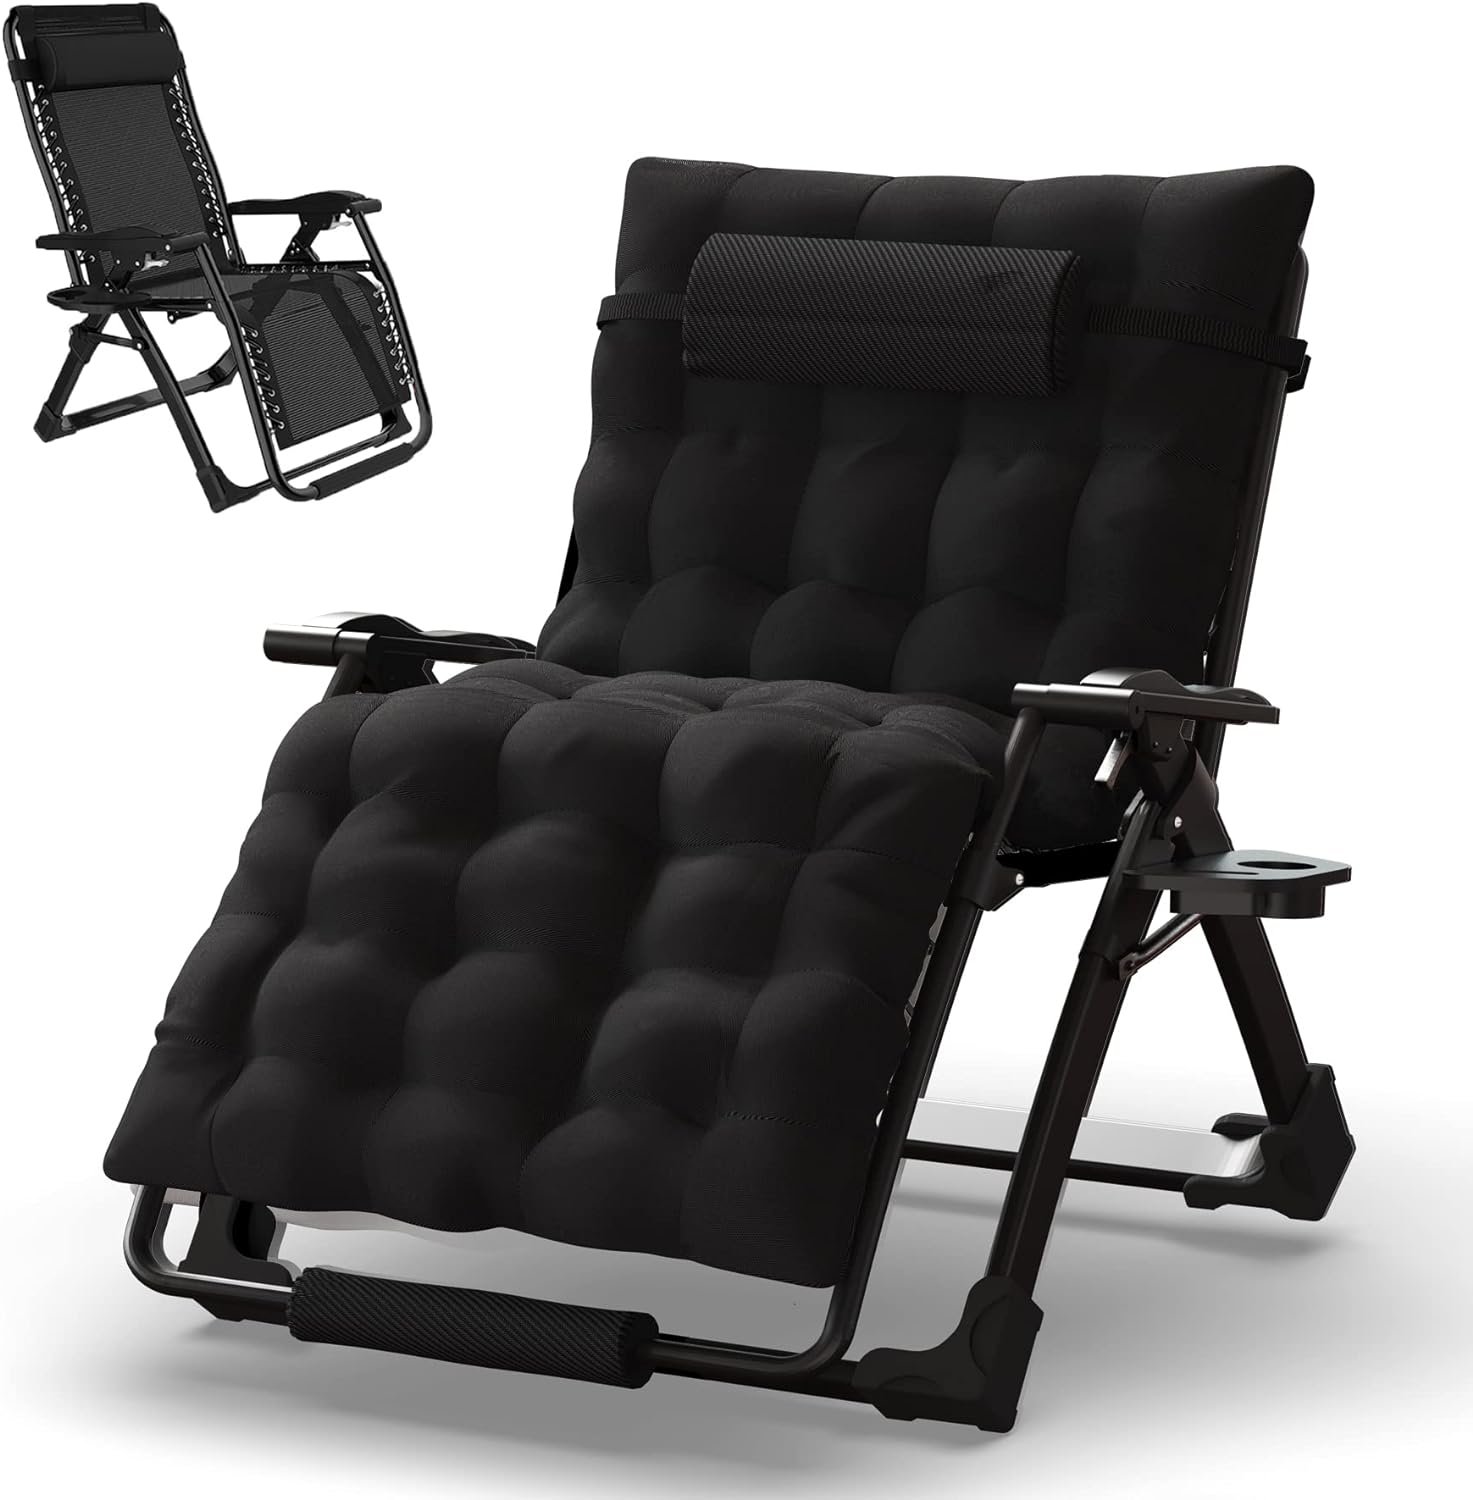 soliles Oversized XXL 30 in Zero Gravity Chair, Reclining Lounge Chair with Removable Cushion  Tray for Indoor and Outdoor, Ergonomic Patio Recliner Folding Reclining Chair